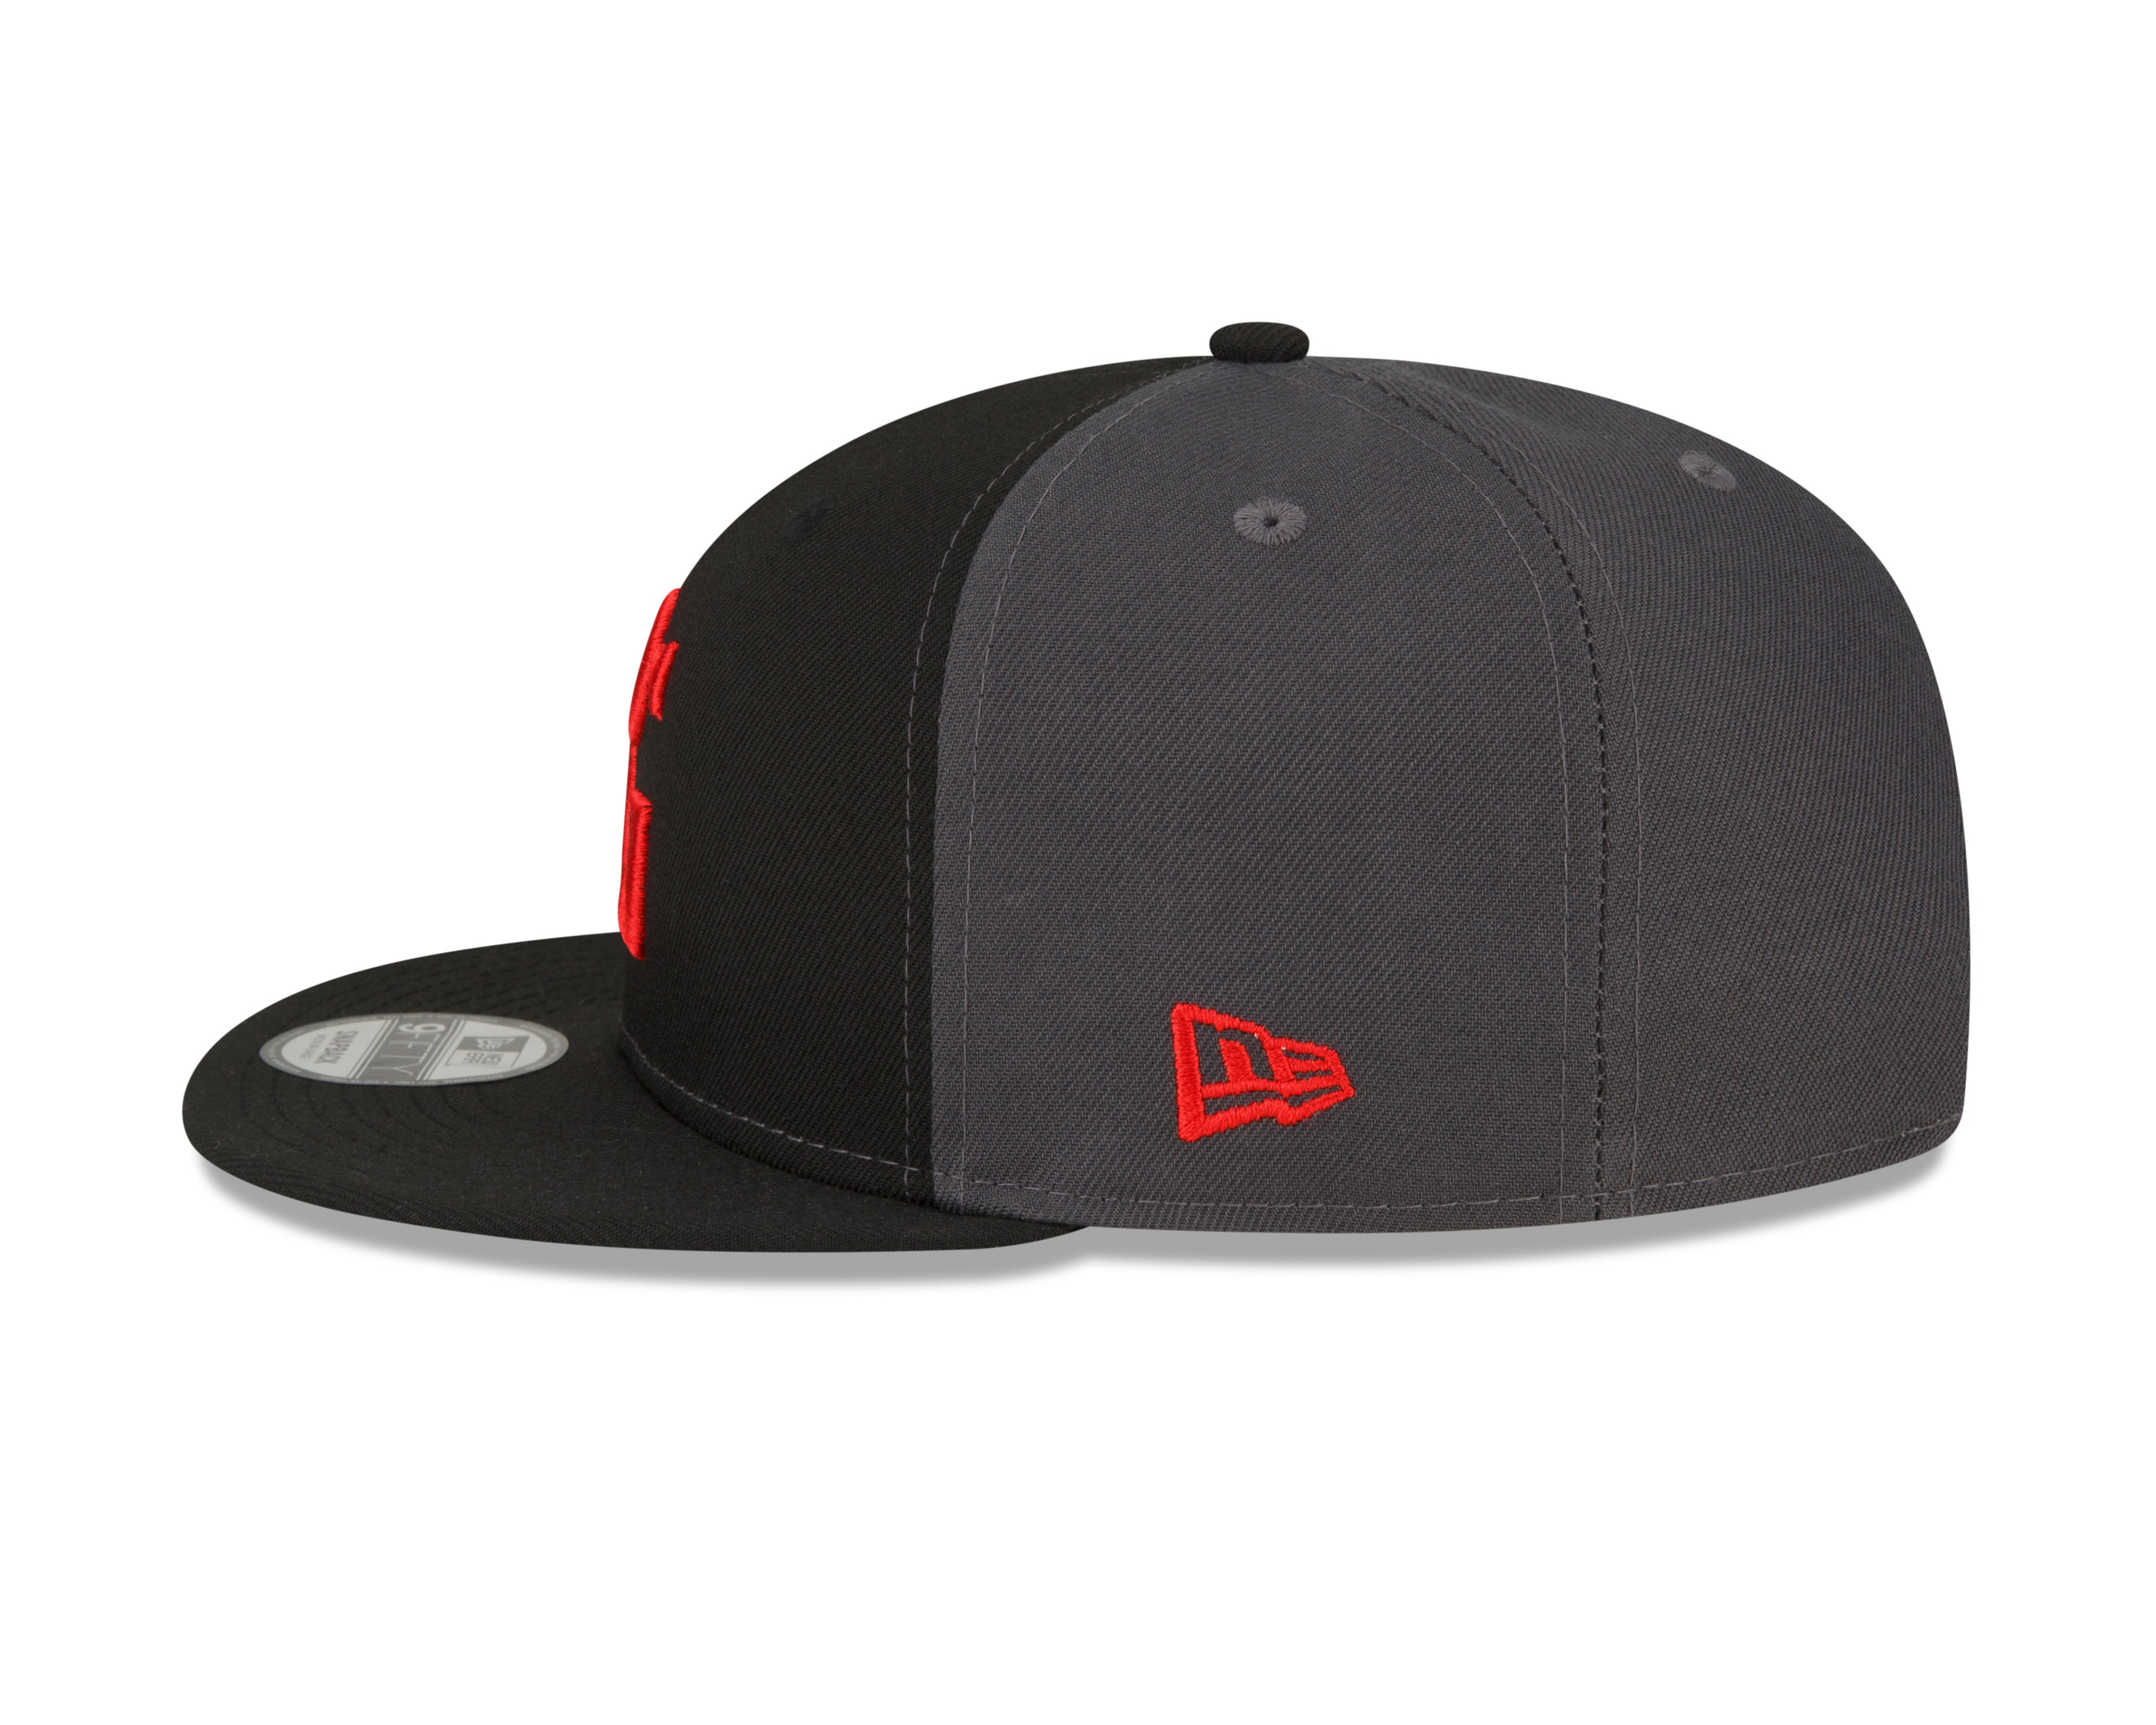 Perfect Game x New Era 9FIFTY Snapback - Black/Red